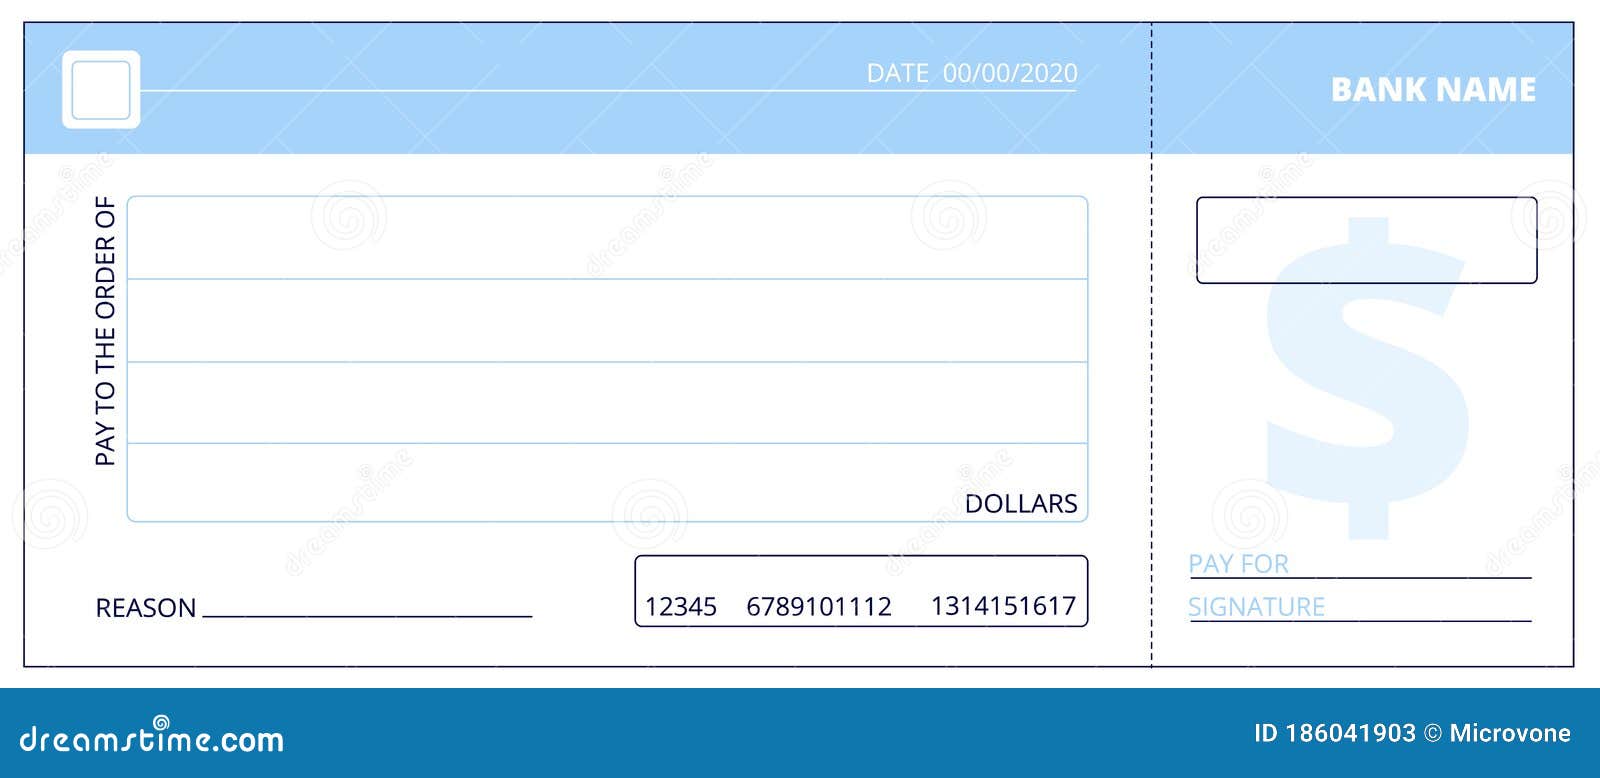 Blank Check Template. Business Cheque Book Design. Bank Checking Throughout Blank Business Check Template